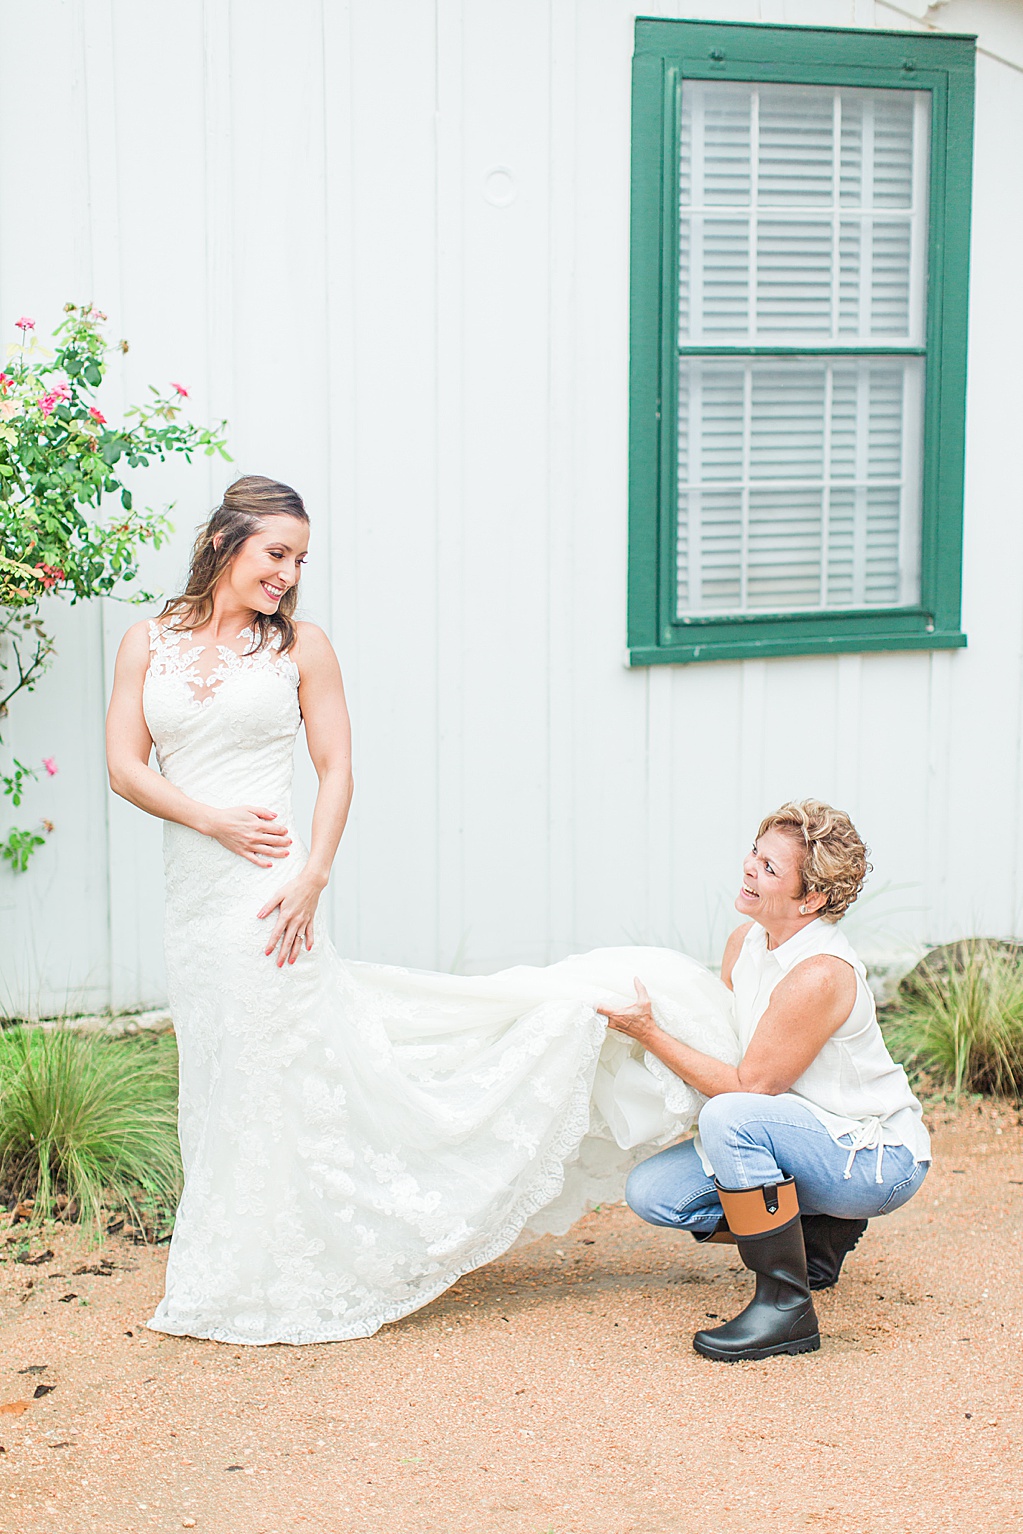 Rainy day bridal session at sisterdale dancehall in boerne texas 0003